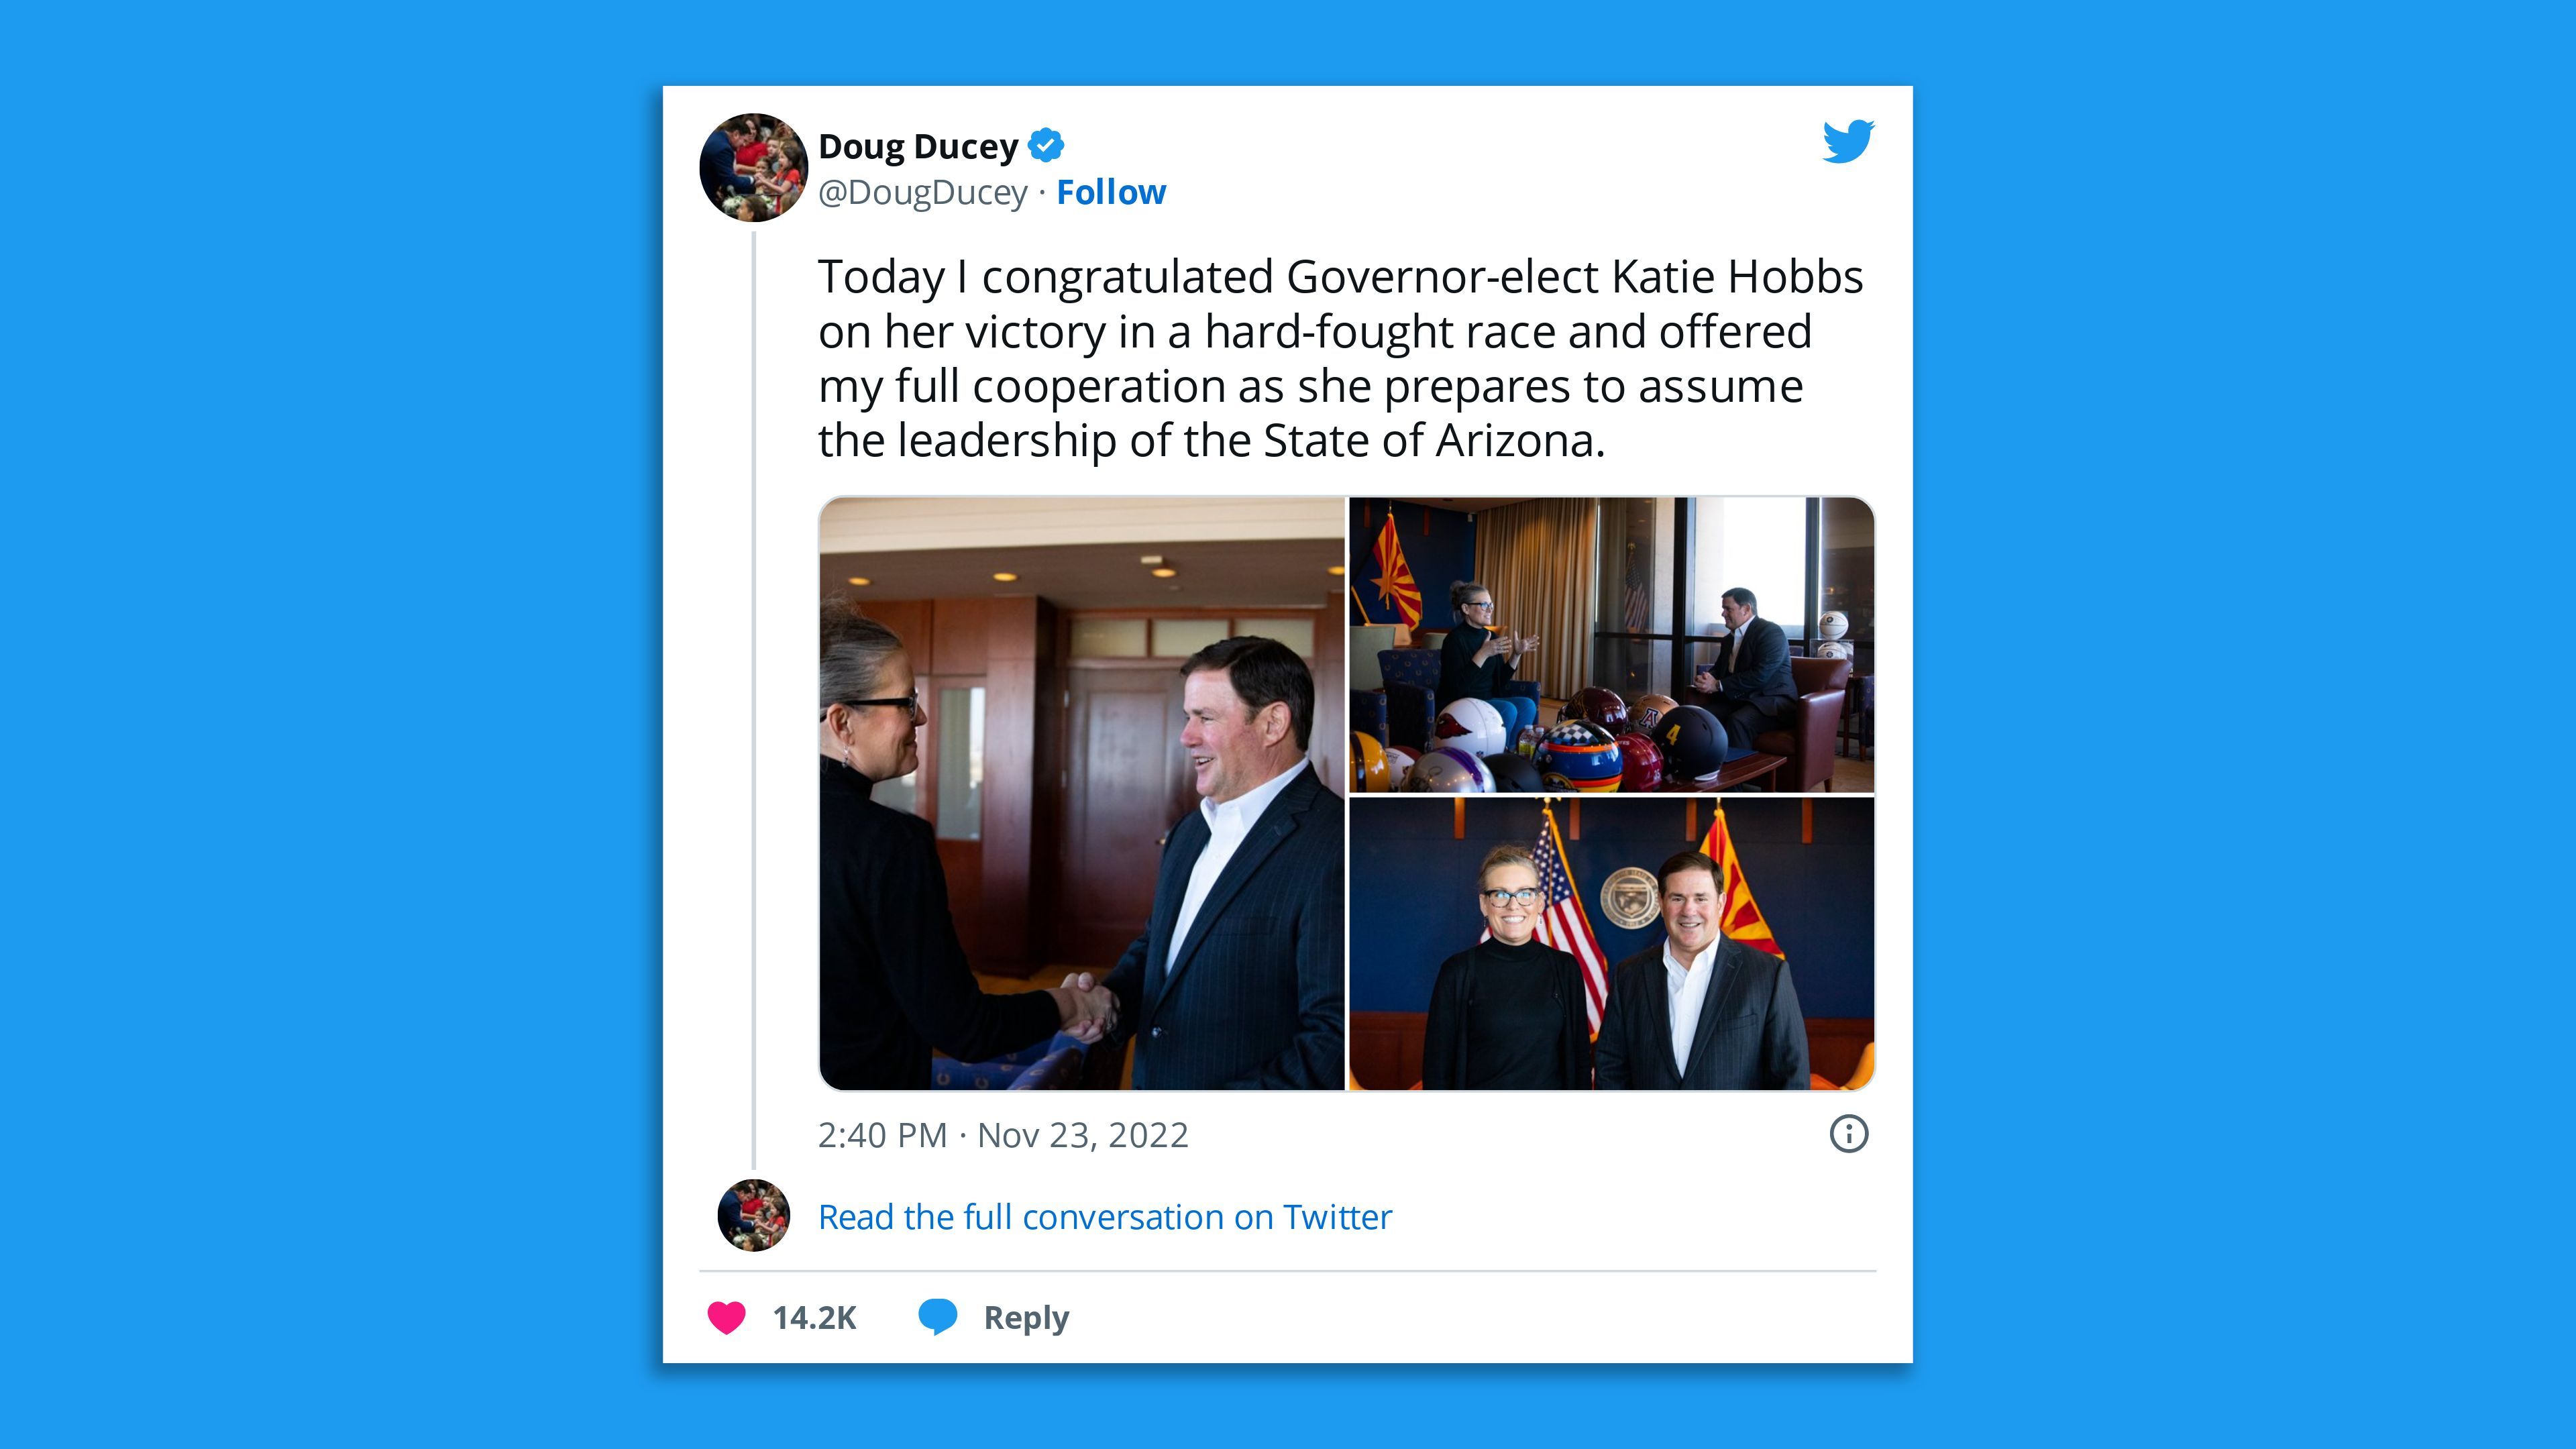 A screenshot of a tweet by Arizona Governor Doug Ducey with Governor-elect Katie Hobbs, congratulating her on her win.